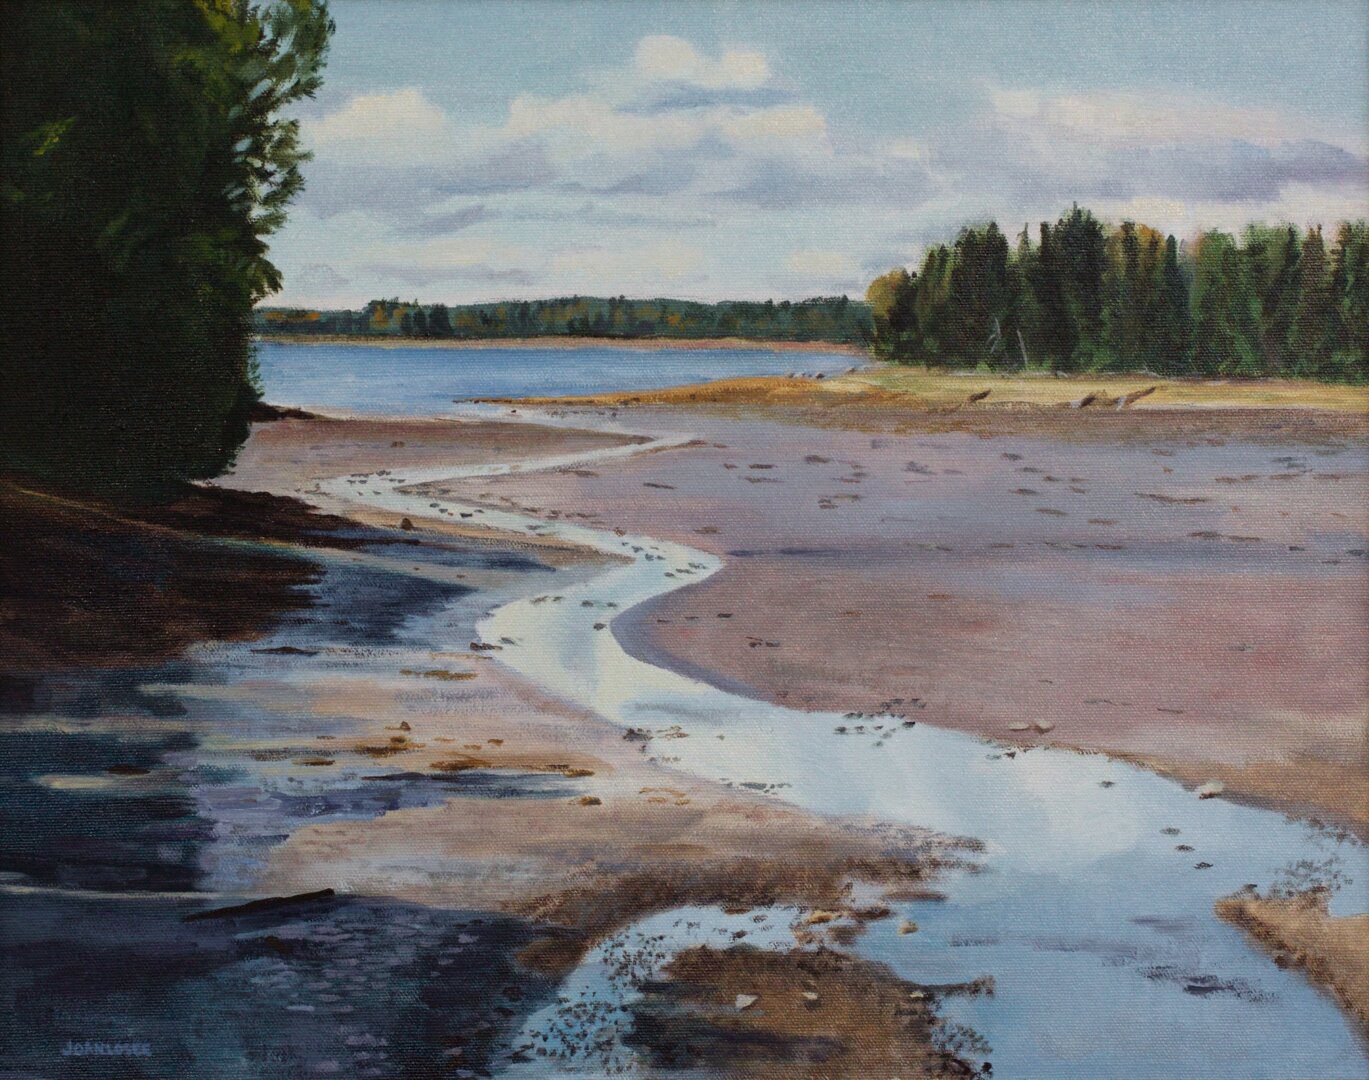 Beautiful oil painting of the River